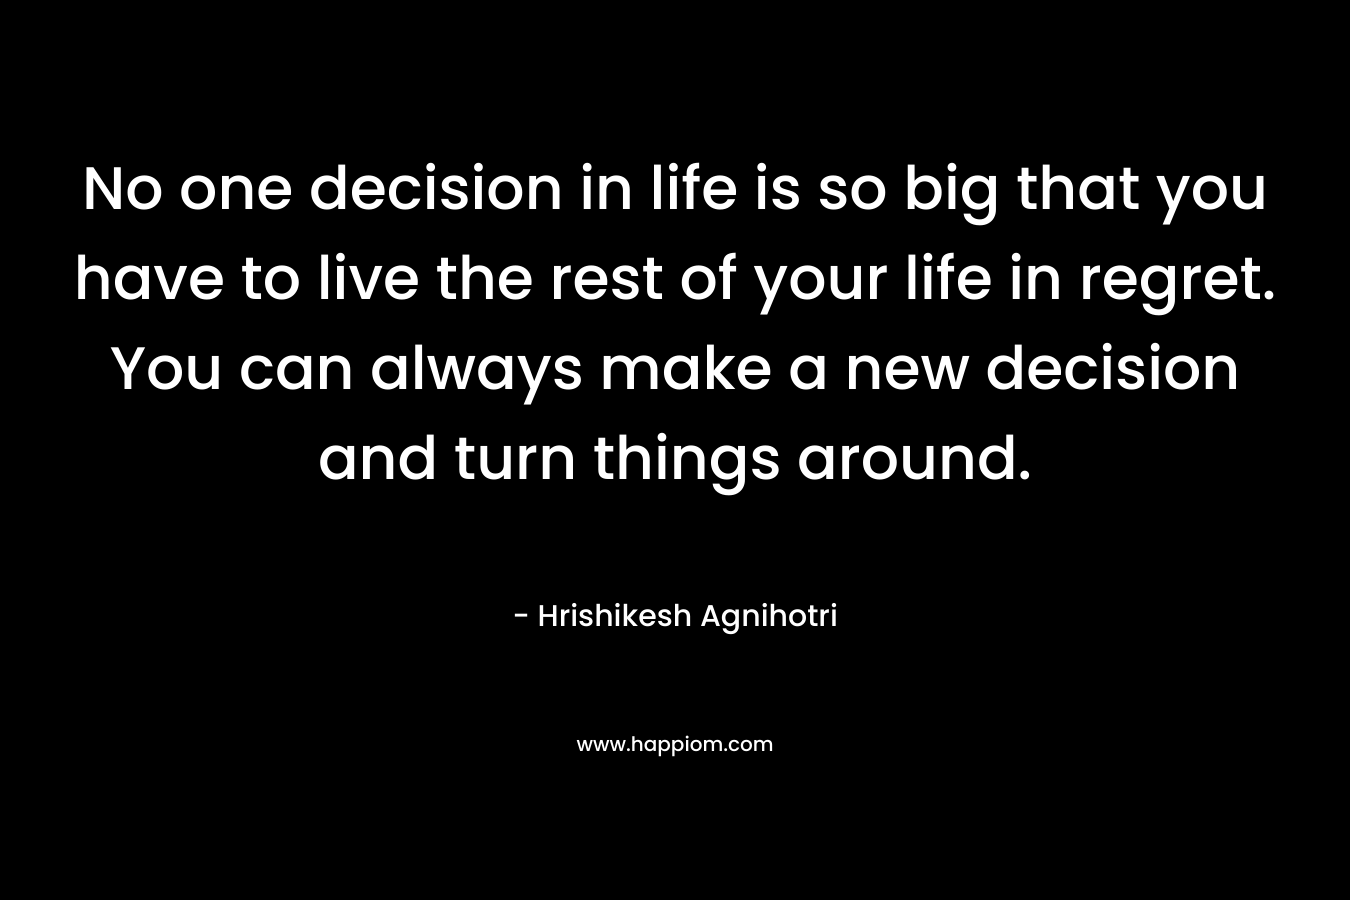 No one decision in life is so big that you have to live the rest of your life in regret. You can always make a new decision and turn things around. – Hrishikesh Agnihotri